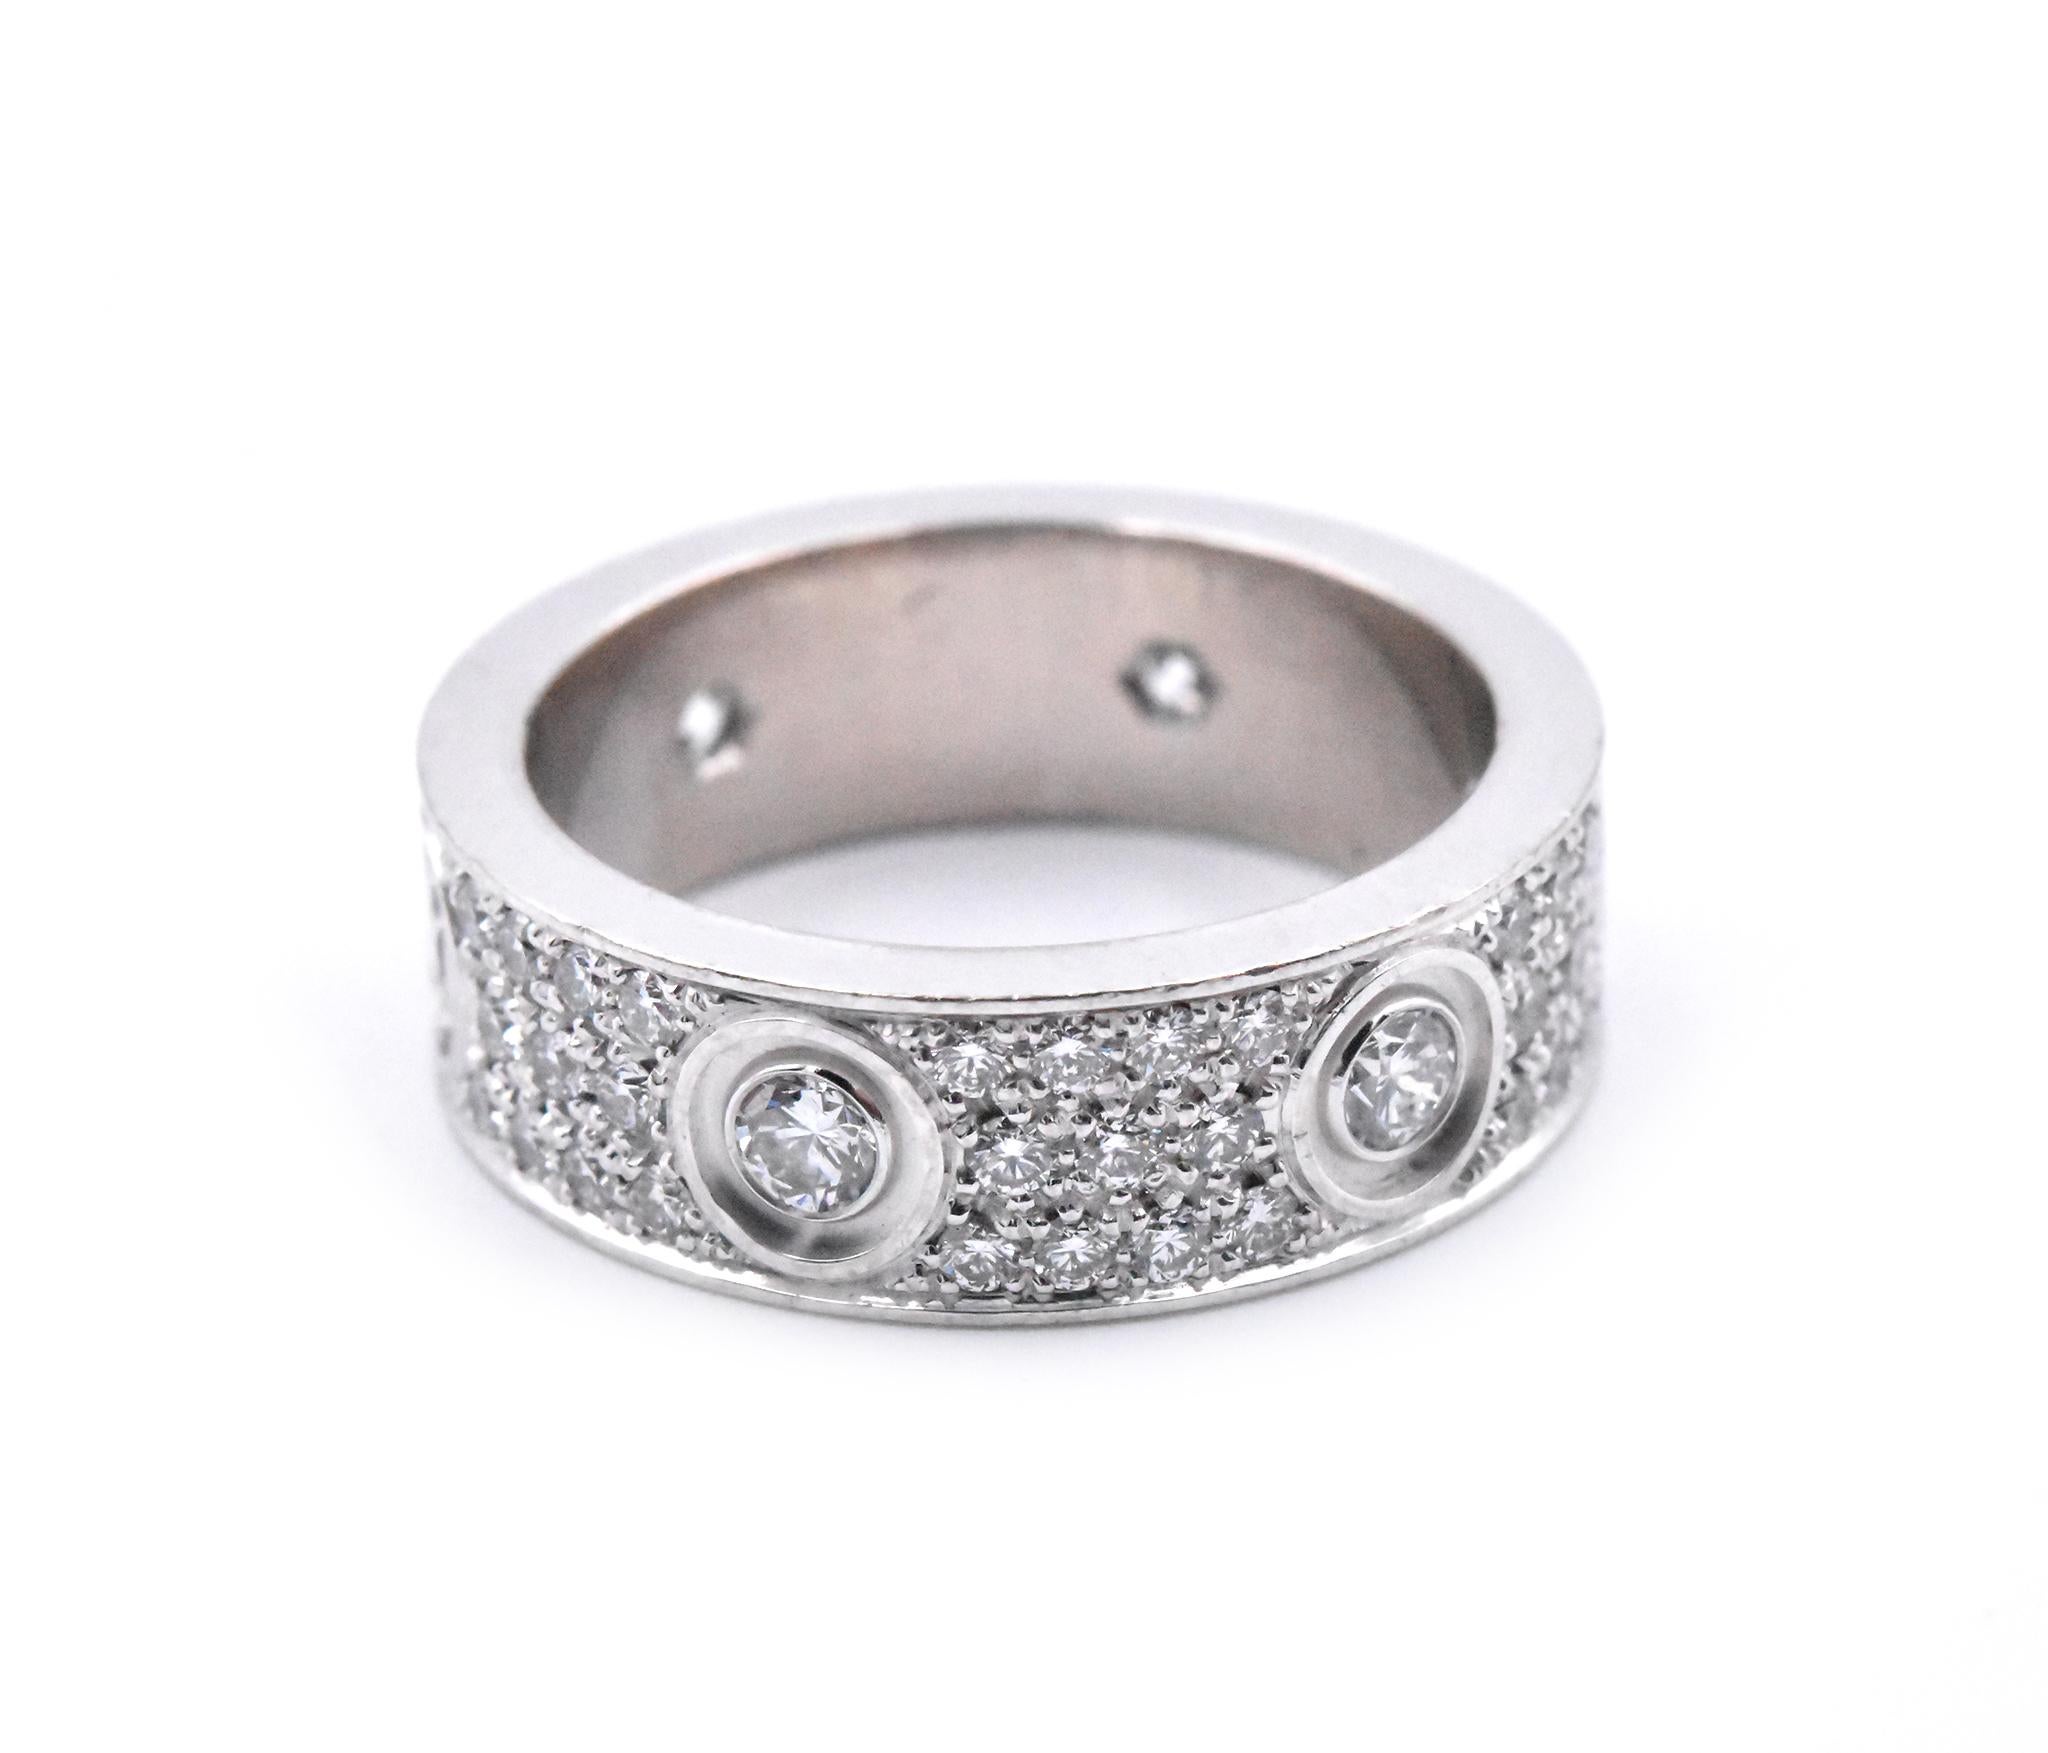 Designer: Cartier
Material: 18k white gold
Ring size: 55 / 7.25
Dimensions: 6.55mm in width
Weight: 10.43 grams
